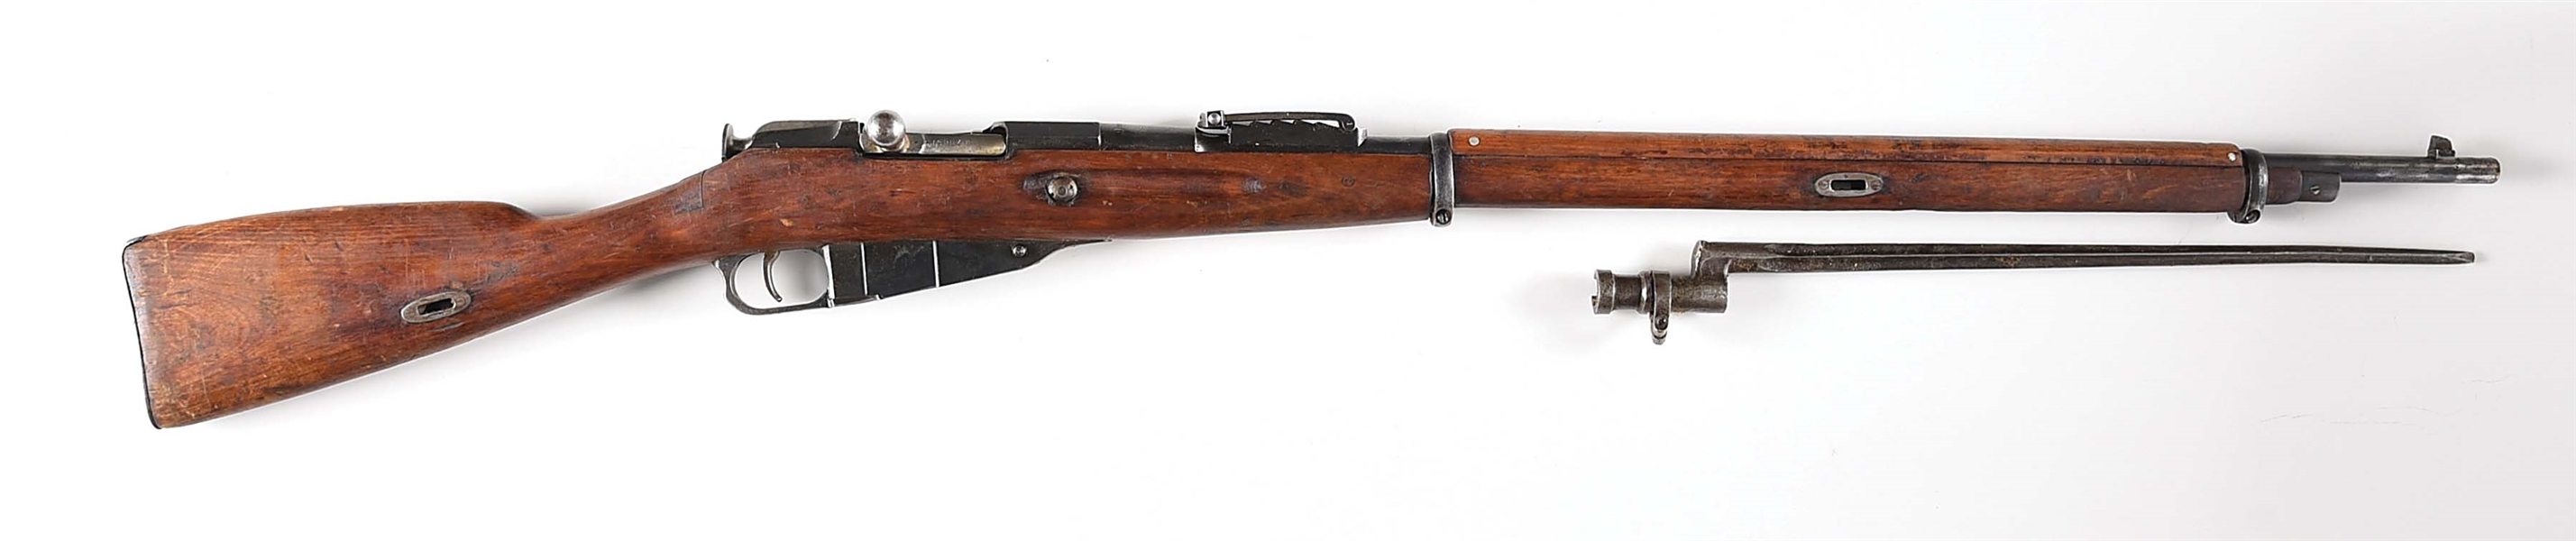 (C) IMPERIAL RUSSIAN M91 MOSIN NAGANT BOLT ACTION RIFLE.